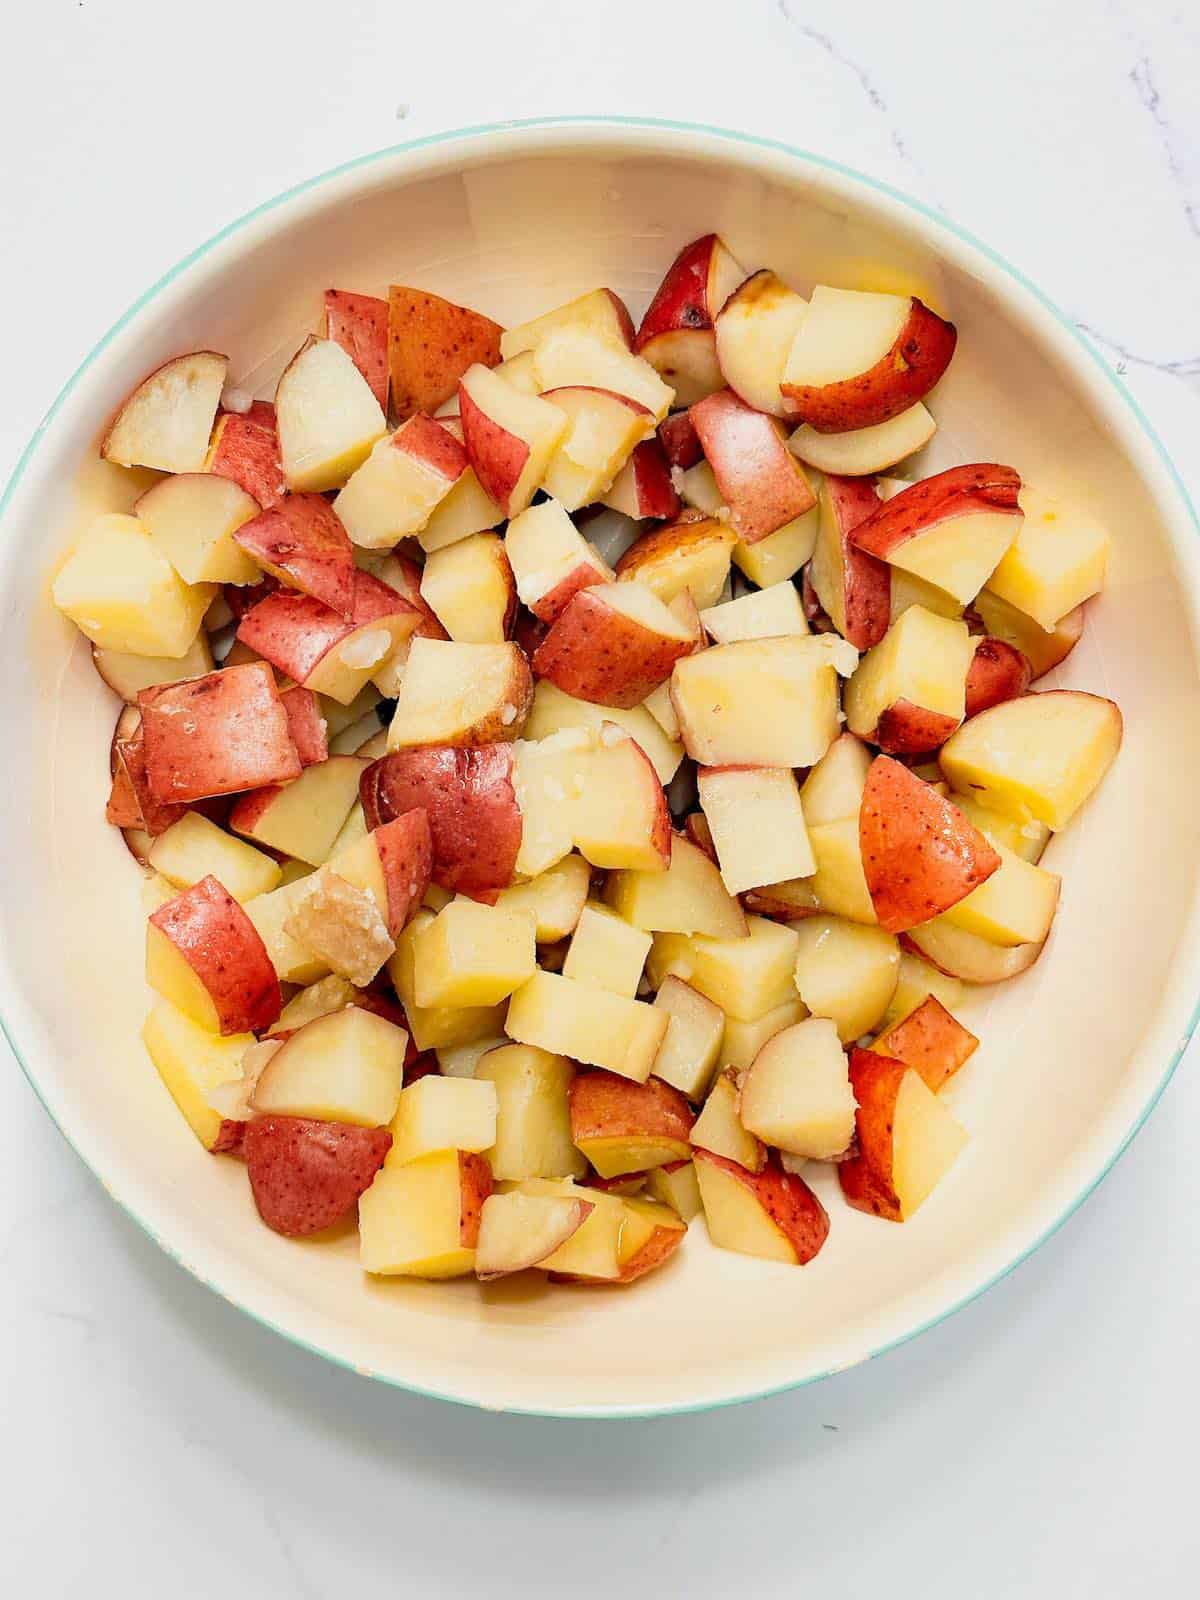 Cooked and chopped red potatoes in a bowl.